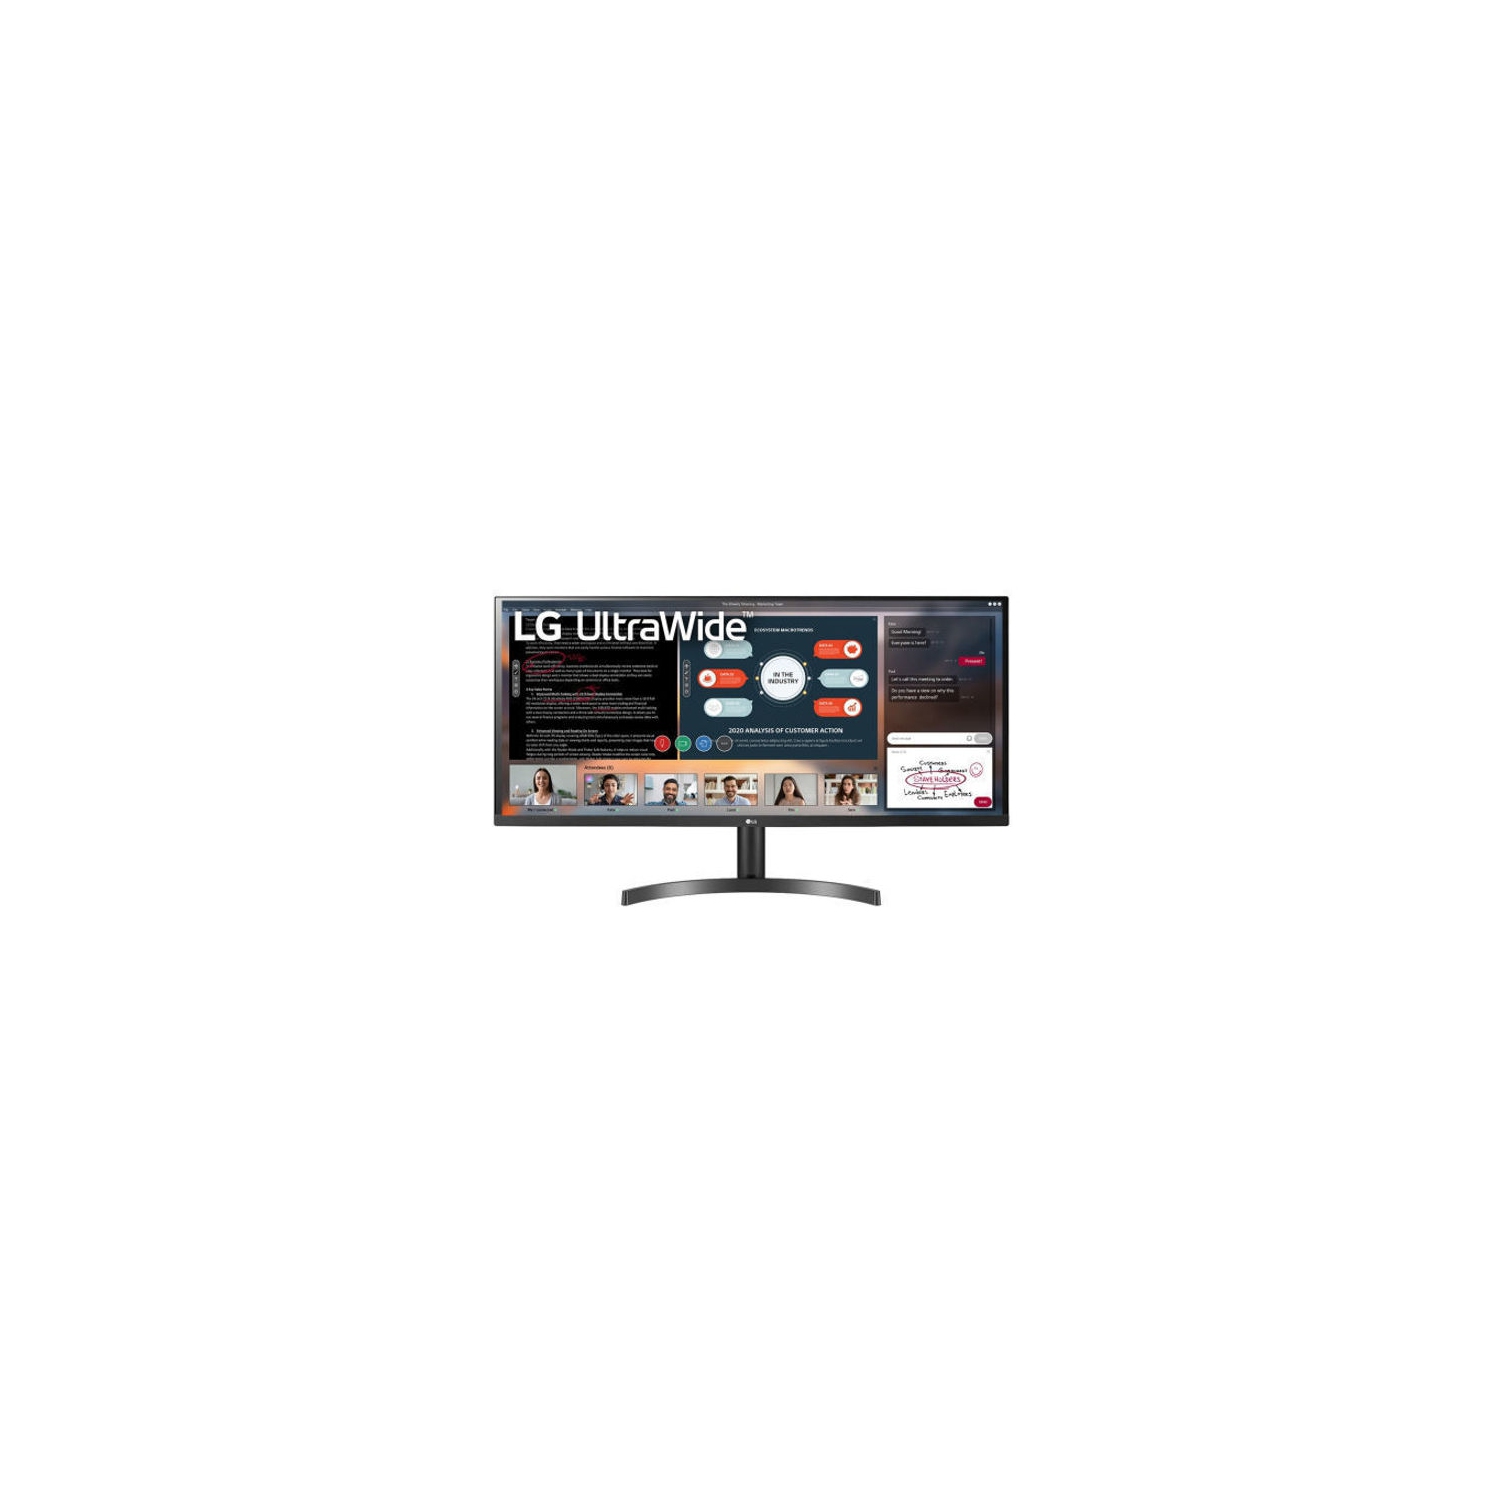 Refurbished (Excellent) - LG 34WL60 34" Ultrawide Full HD IPS Monitor with HDMI - Certified Refurbished